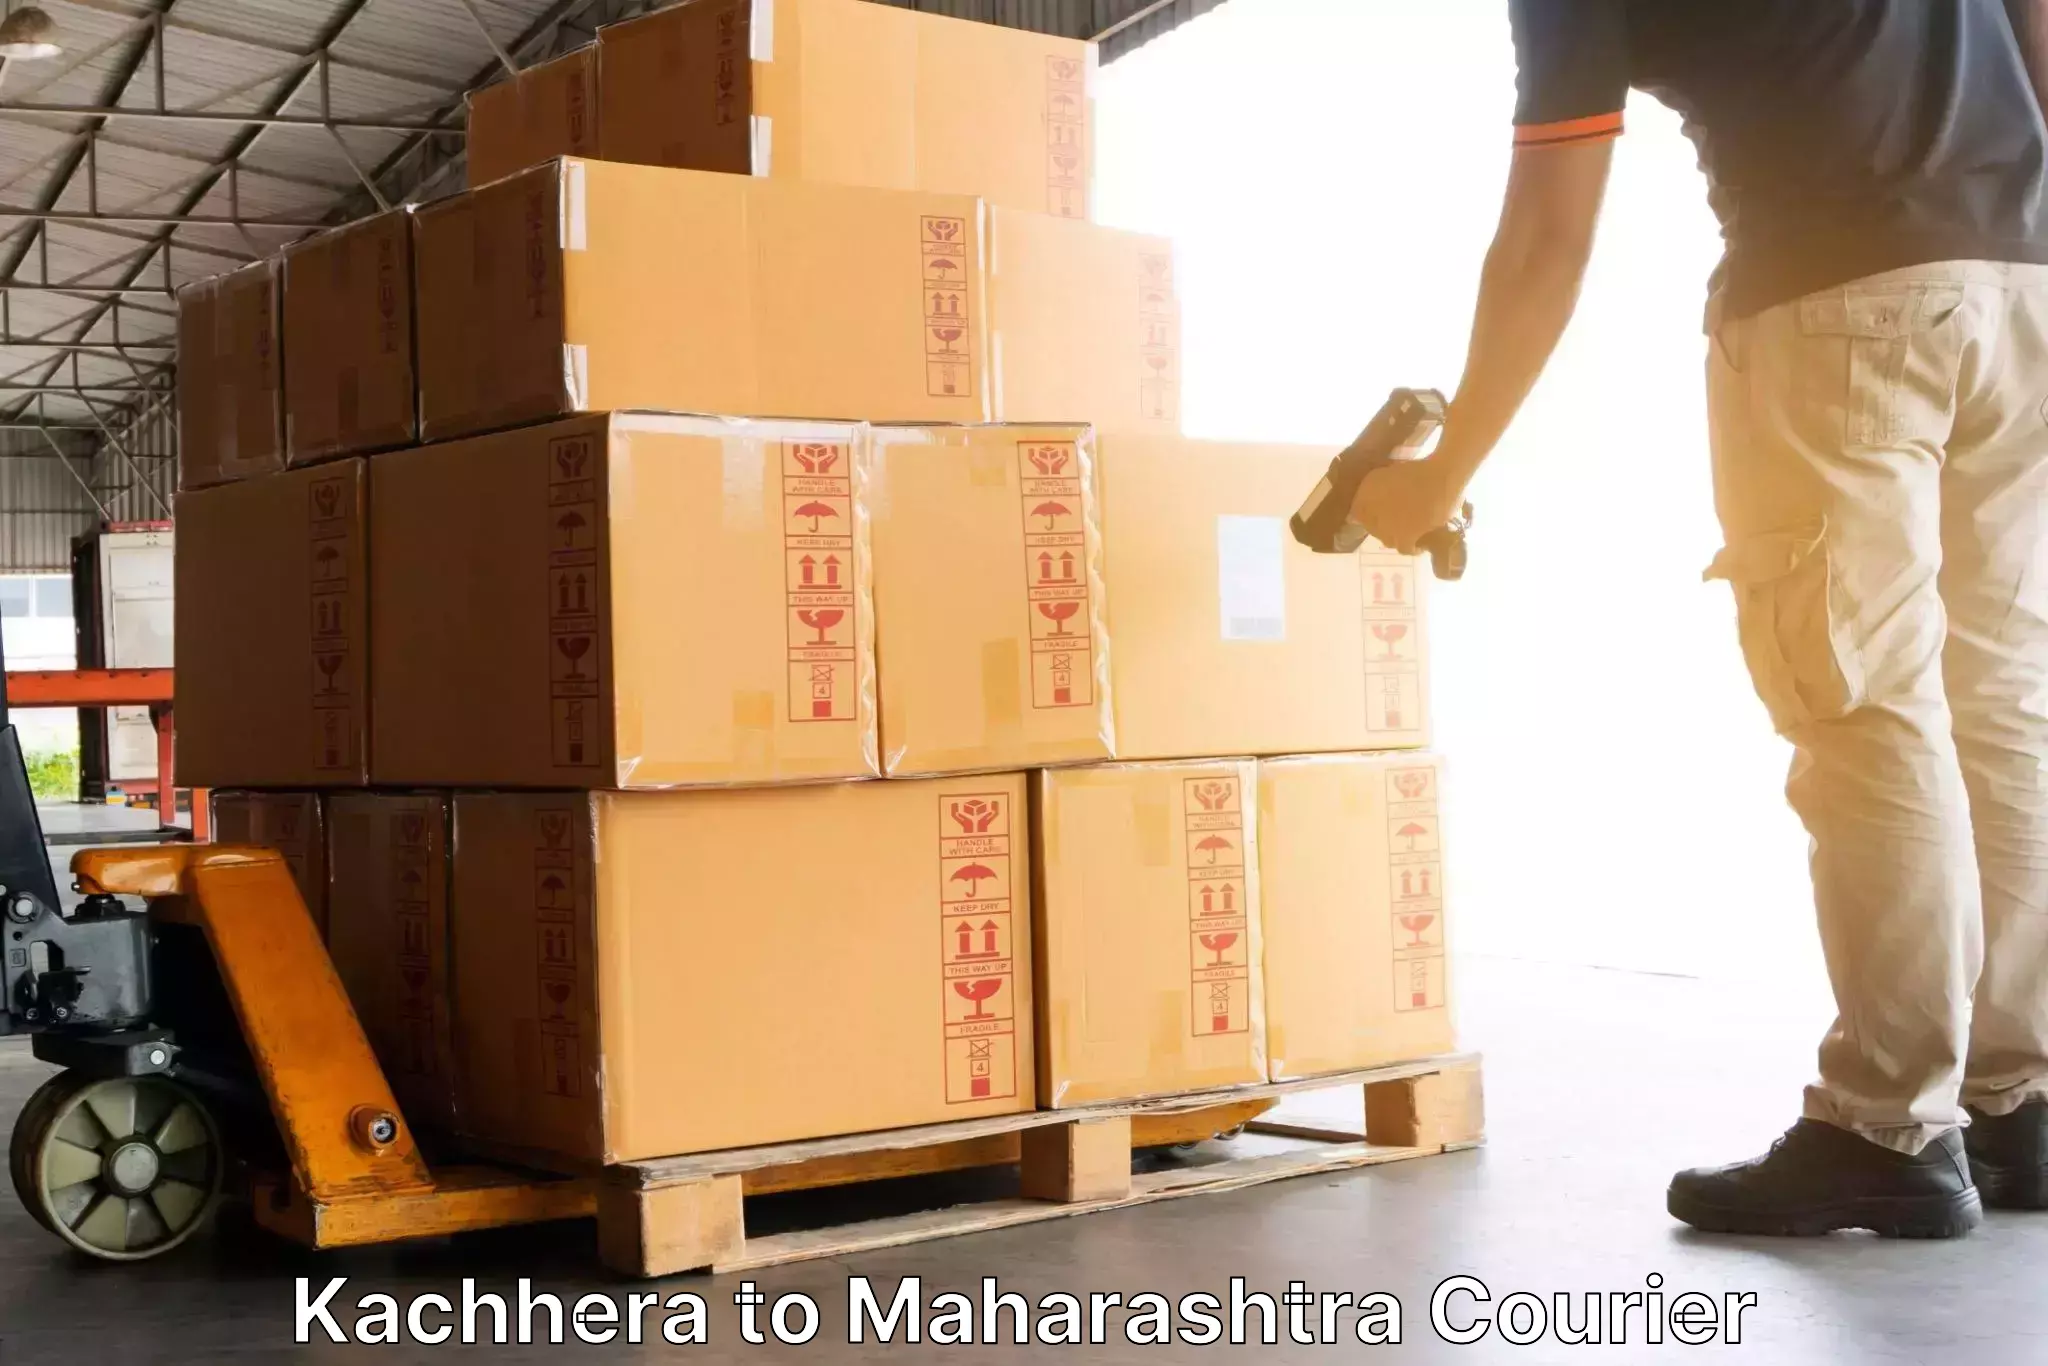 State-of-the-art courier technology in Kachhera to Sawantwadi